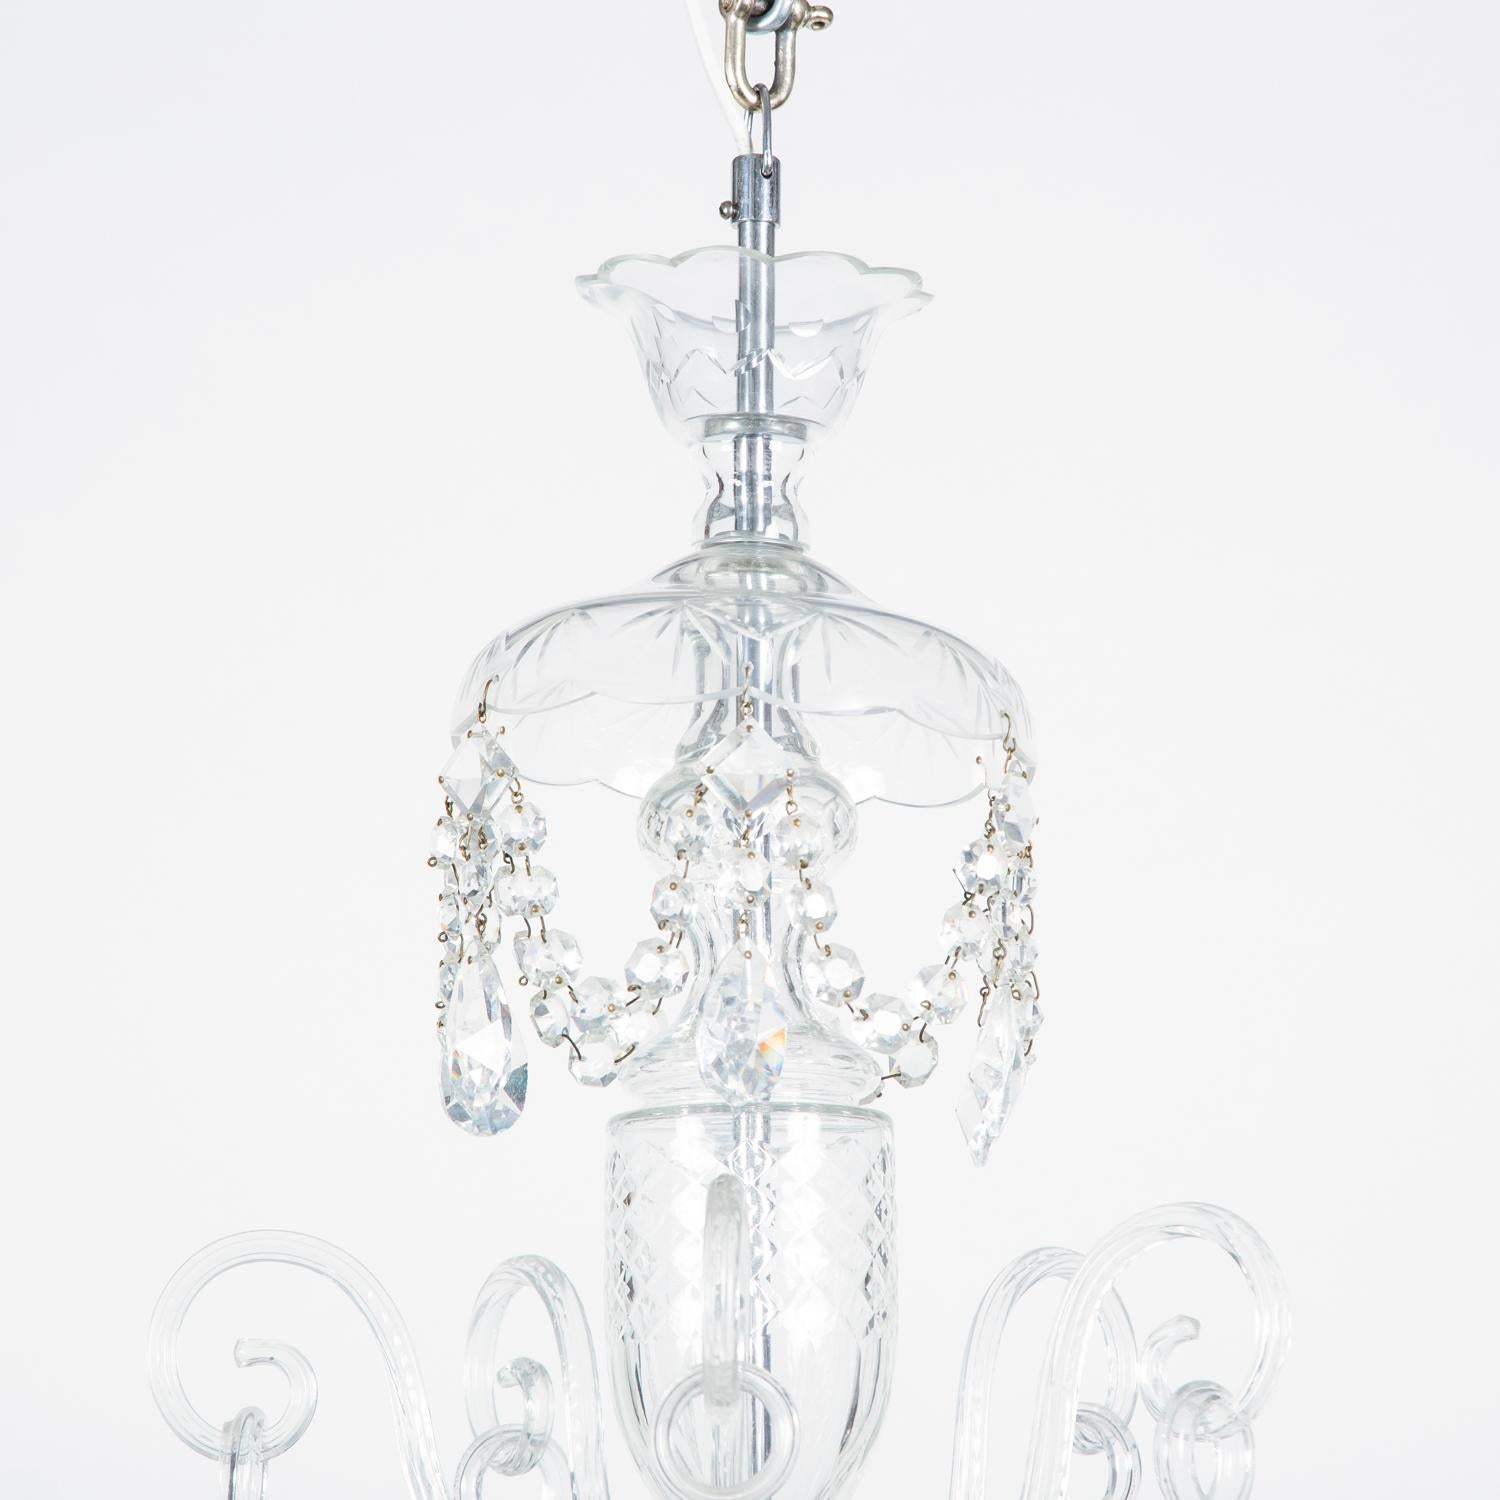 European Bohemian Crystal Chandelier with 5 Arms